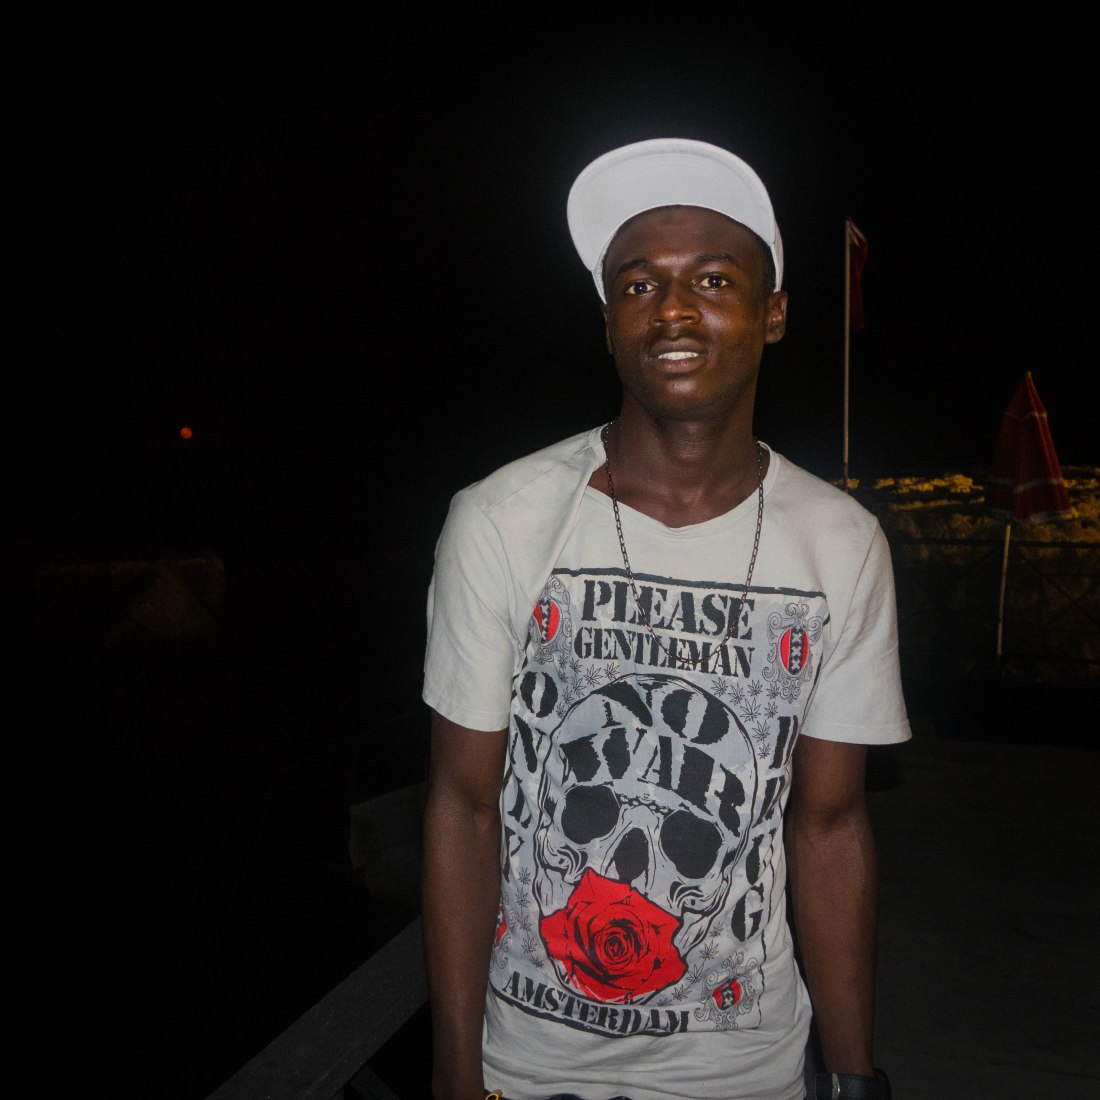 Abdoullah, 18 years old, The Gambia.